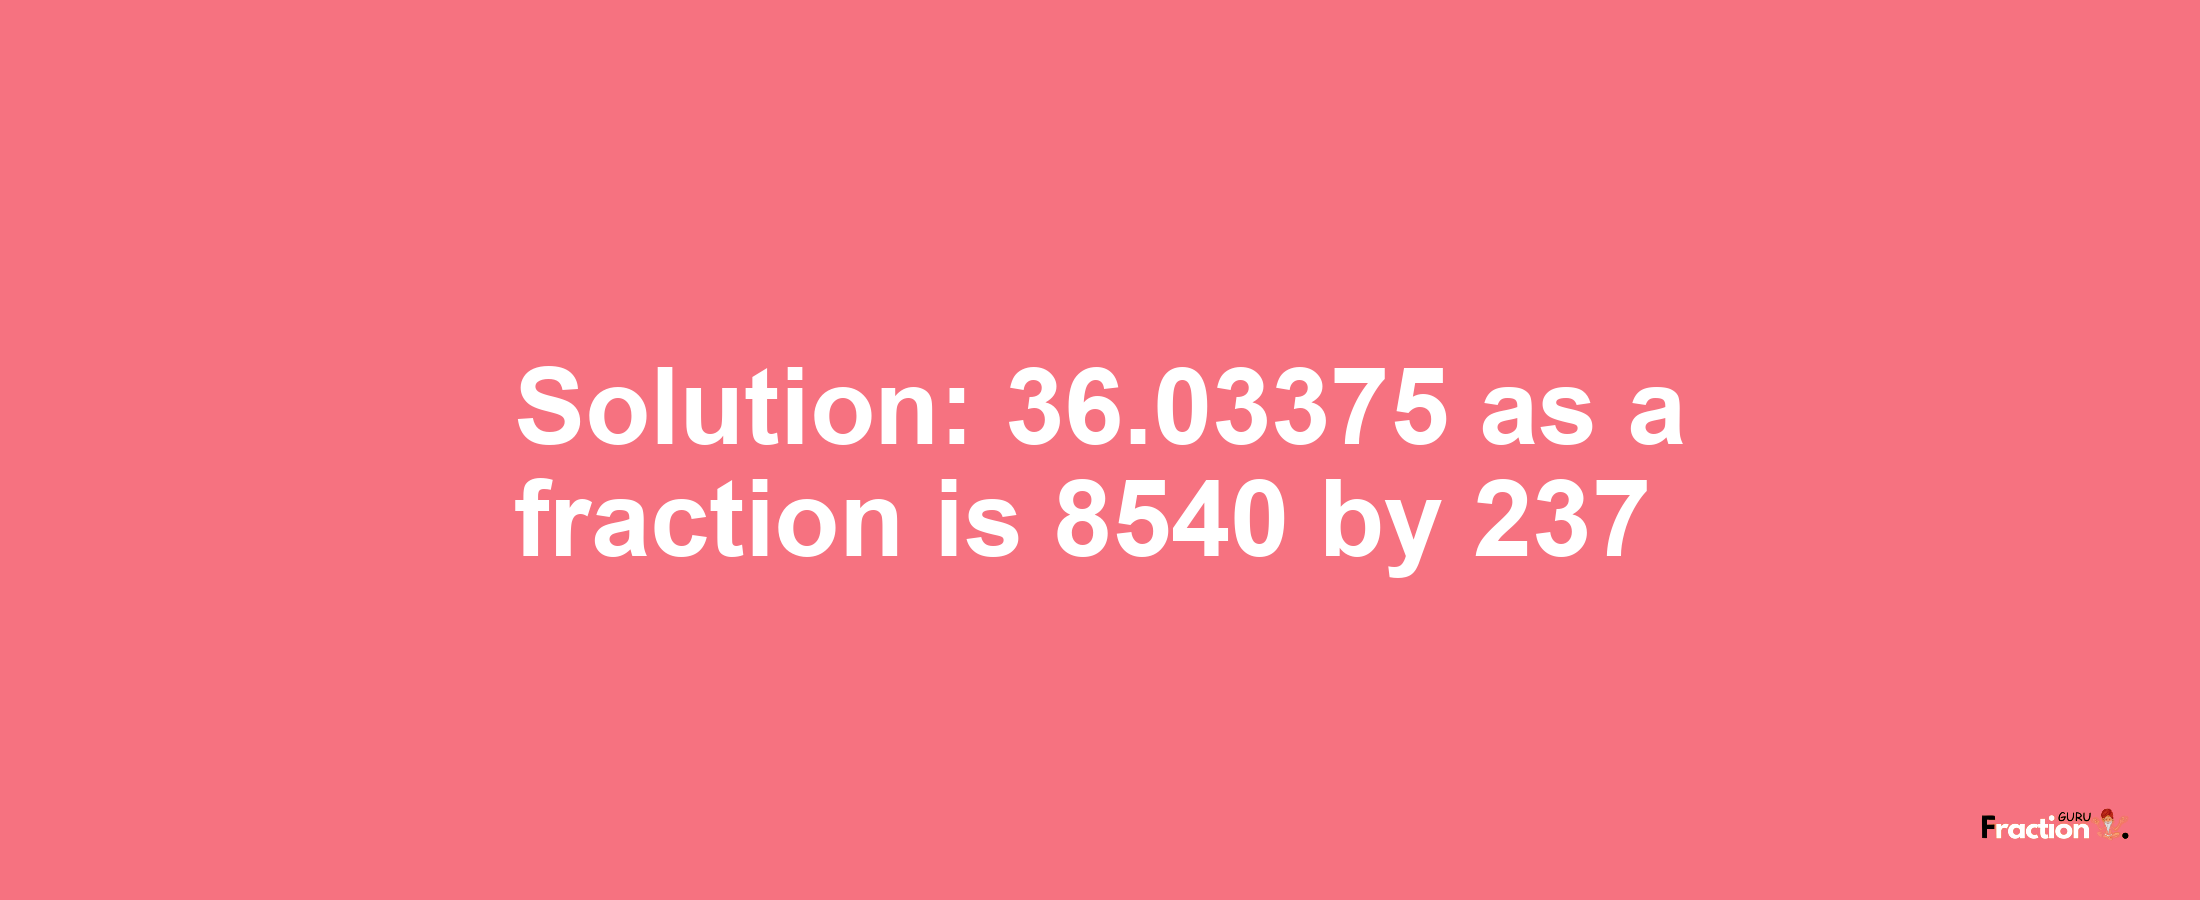 Solution:36.03375 as a fraction is 8540/237